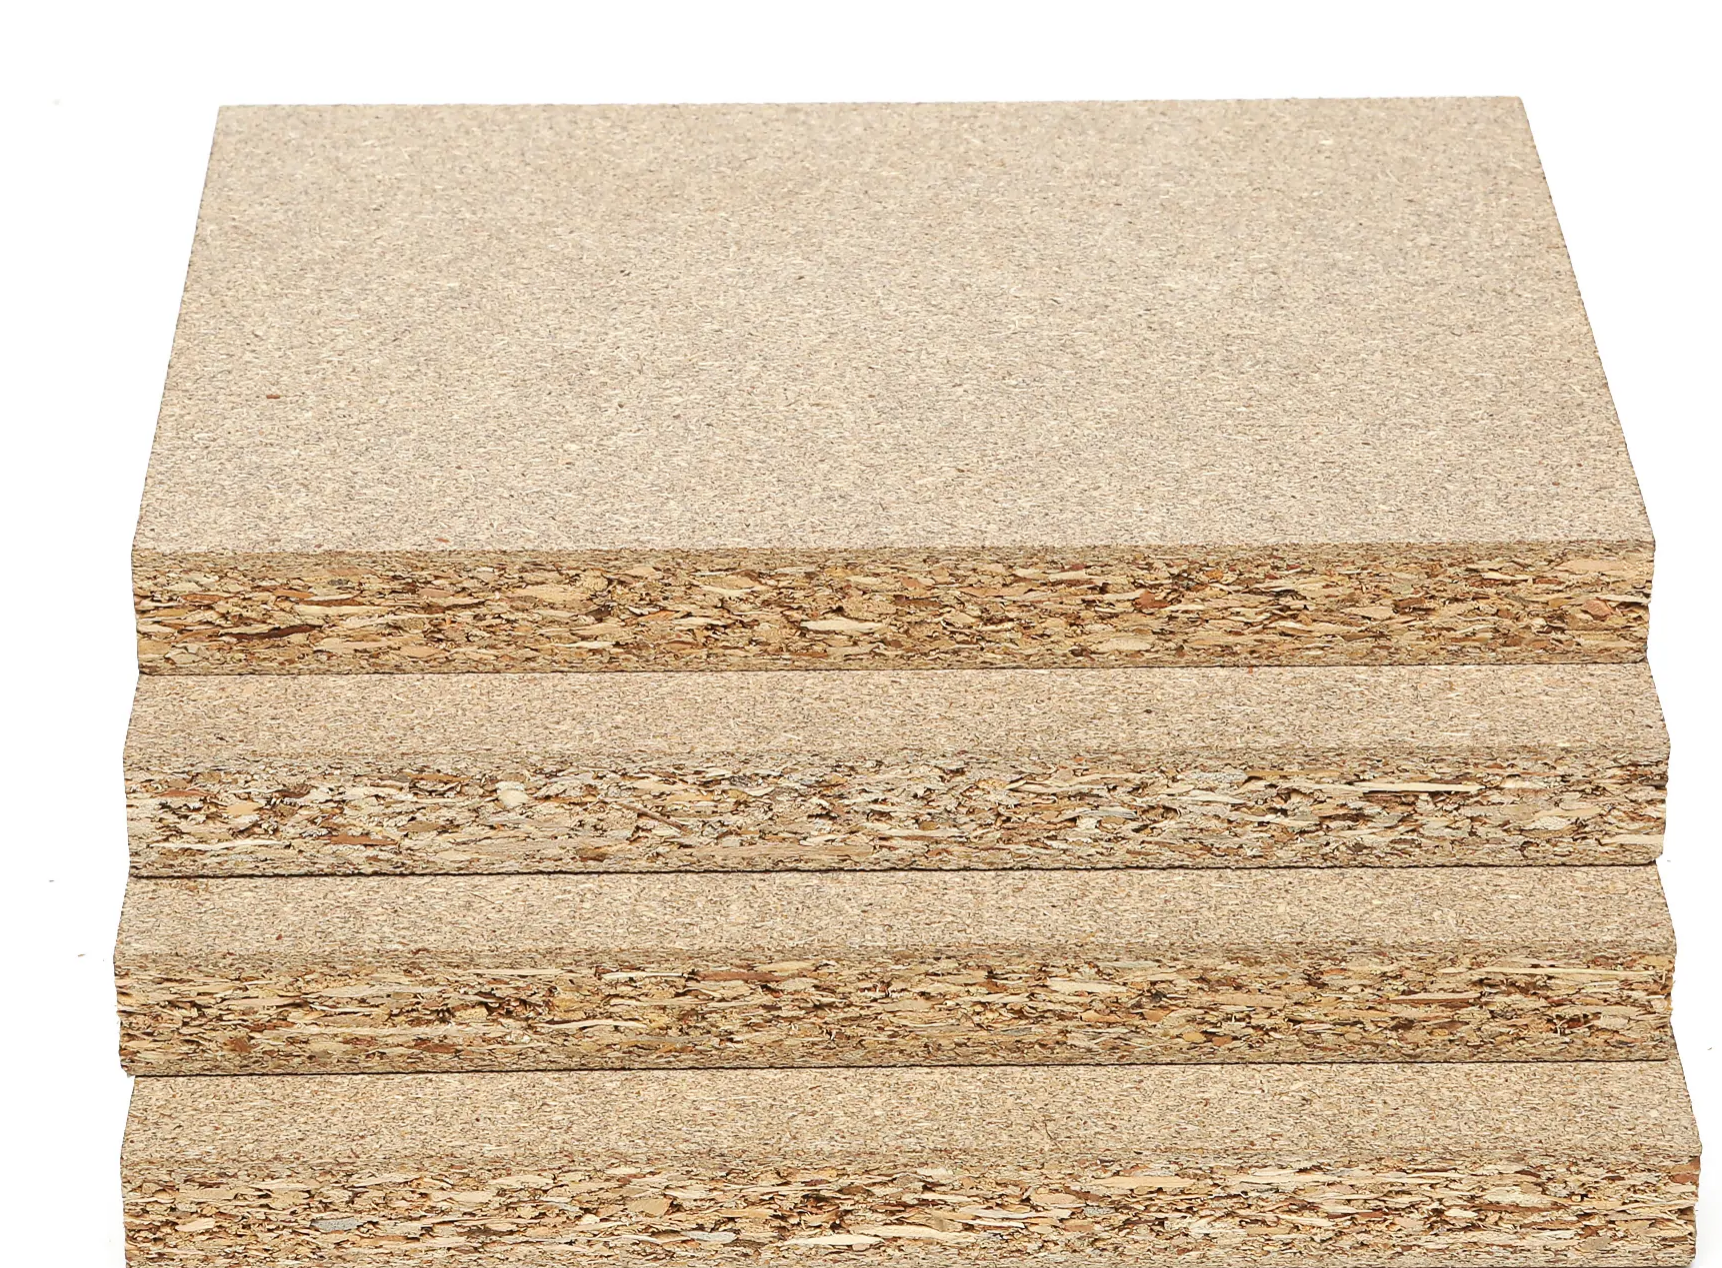 How to choose particle board?